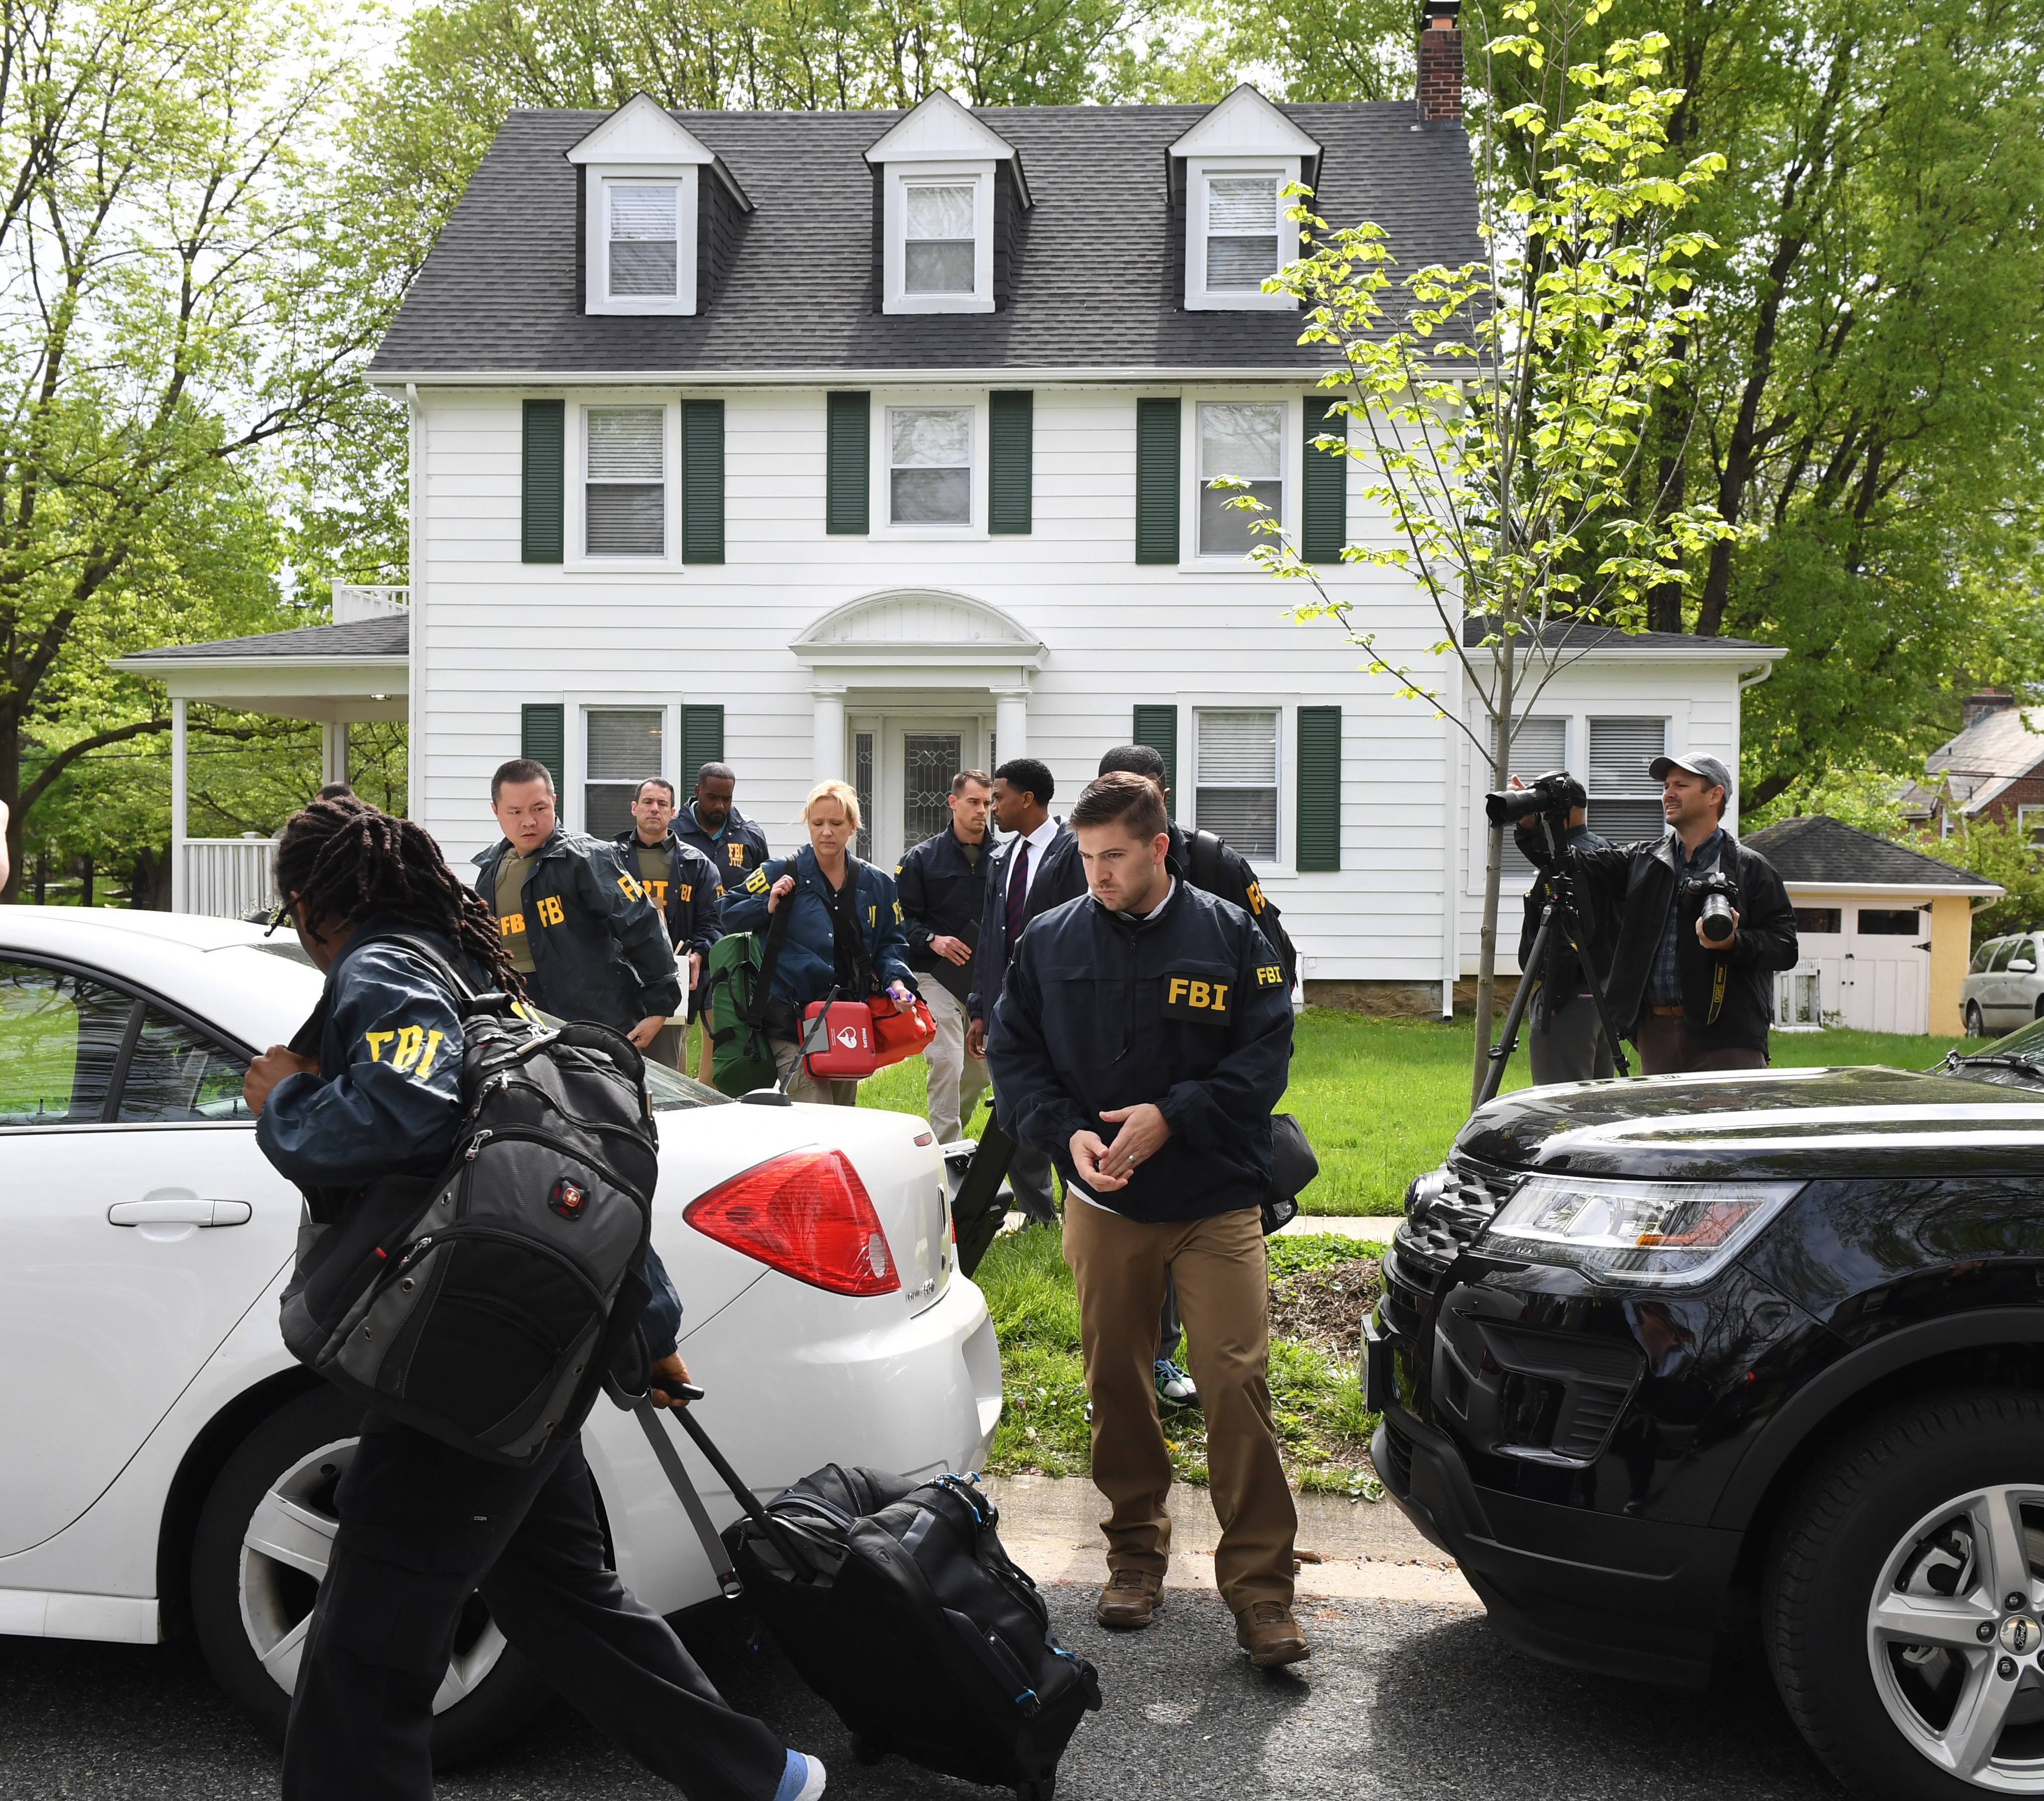 BALTIMORE, MARYLAND - APRIL 25: Federal agents remove items from the home of Baltimore Mayor Catherine Pugh in the 3400 block of Ellamont Rd as they execute a search warrant, on April 25, 2019 in Baltimore, Maryland. Federal agencies raided City Hall, the home of Mayor Catherine Pugh and several other properties as the investigation into the mayor’s business dealings for sales of the “Healthy Holly” books widened. Getty Images/ John Strohsacker